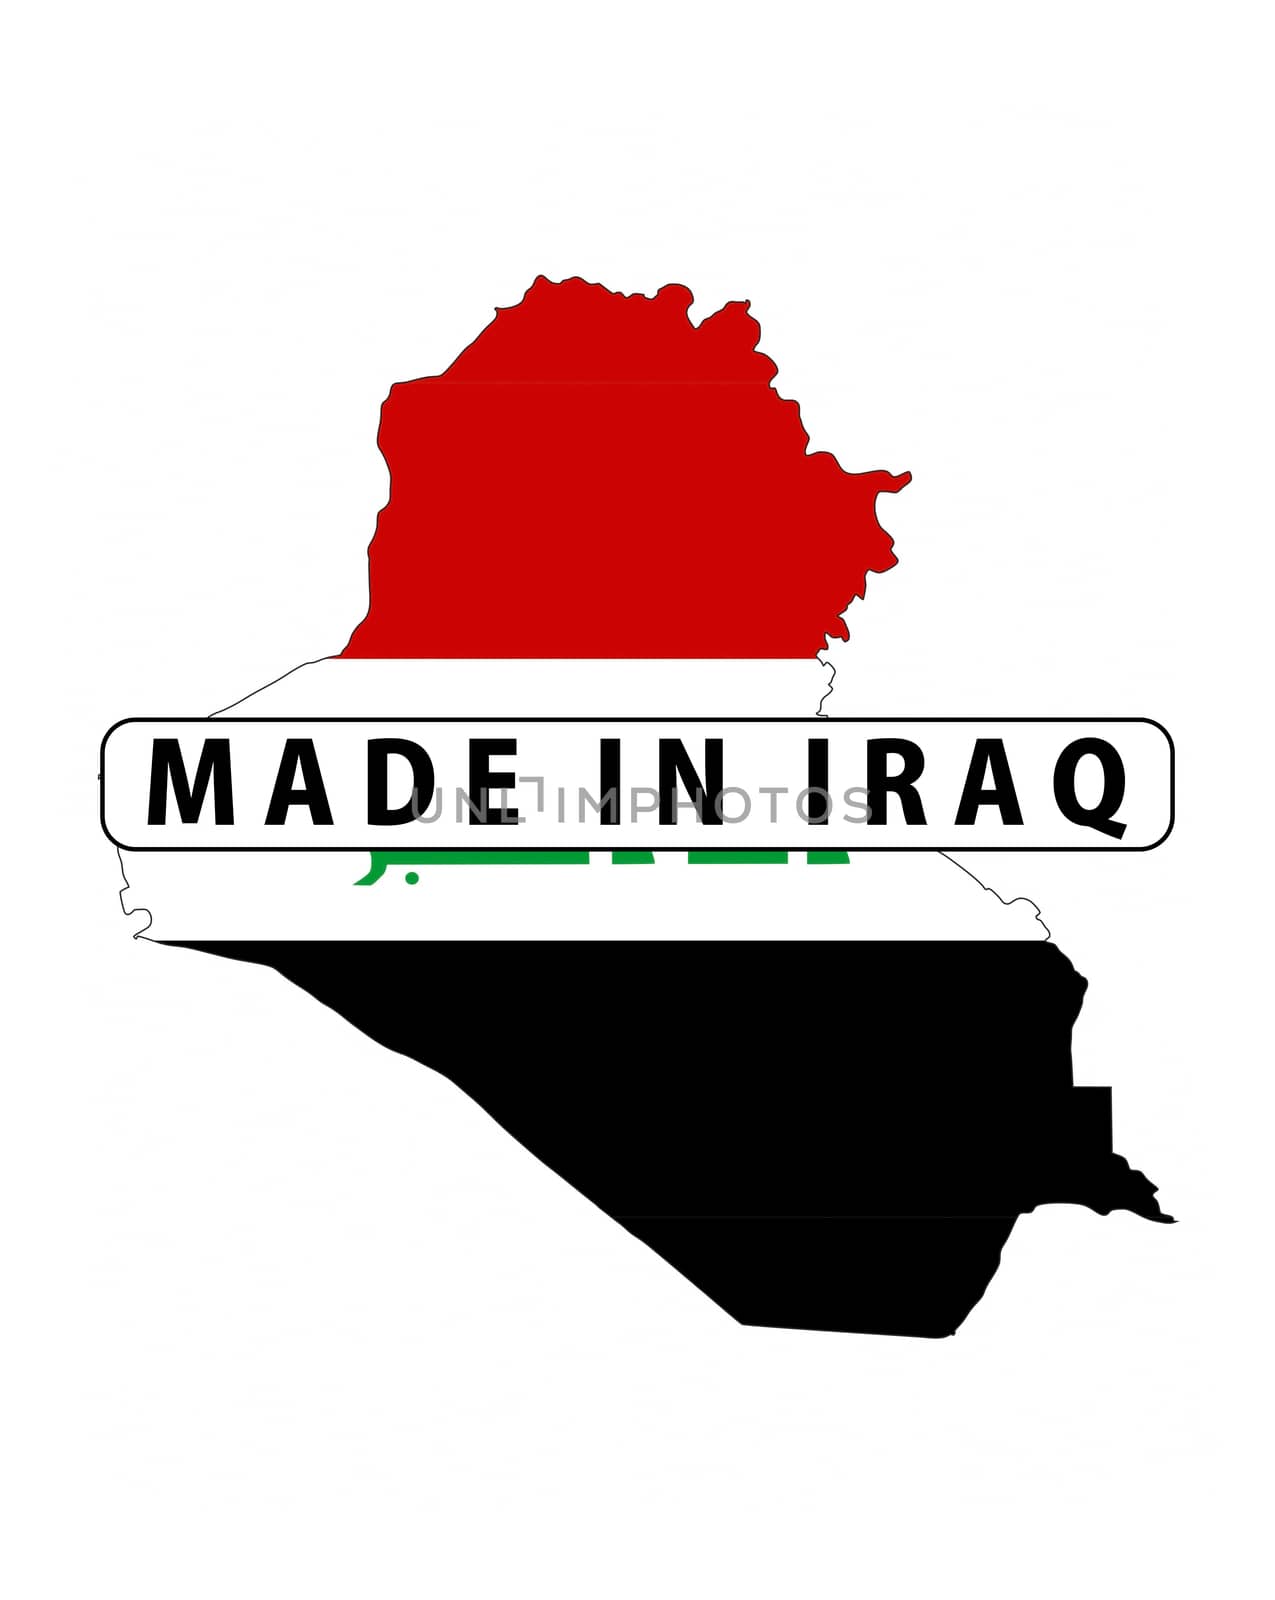 made in iraq country national flag map shape with text